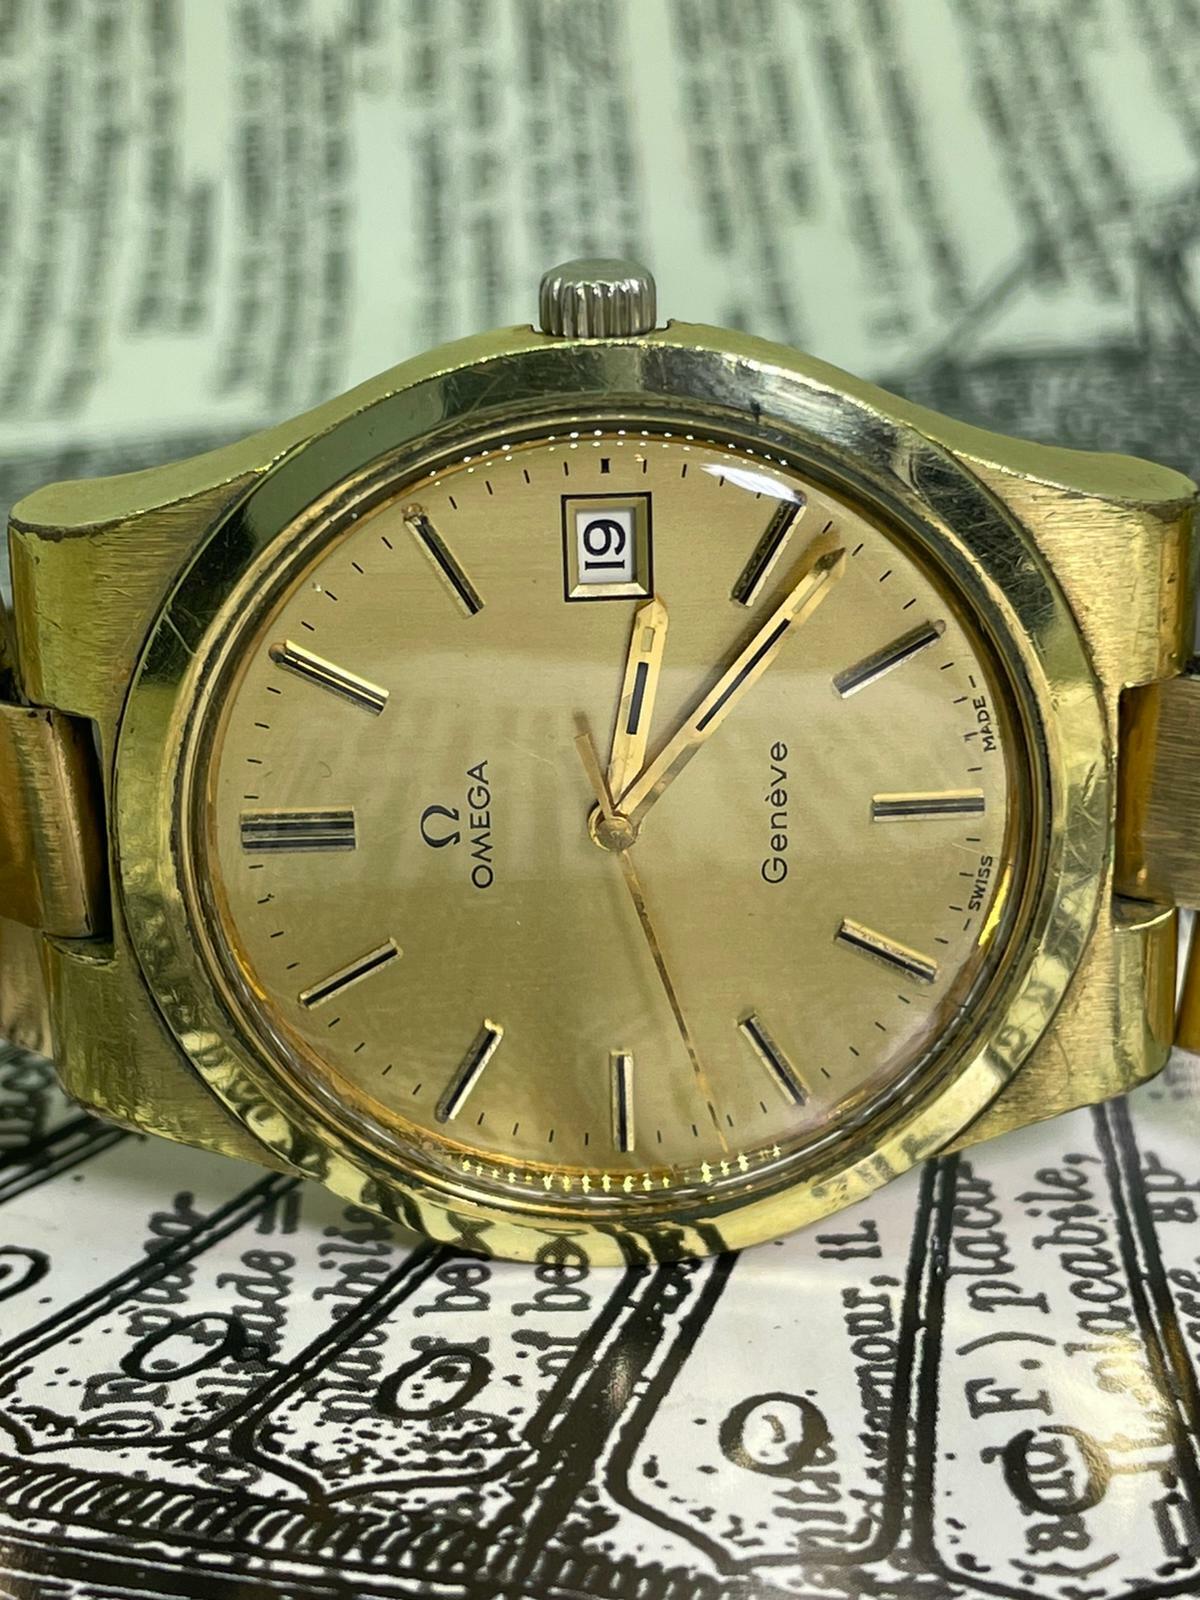 This Sophisticated Vintage Omega Geneve dates from 1974,
despite its age this timeless & classy wristwatch is in good condition & in excellent working order

It's fitted with manual (hand-winding) caliber 1030, 17 jewel movement
& features a 38mm